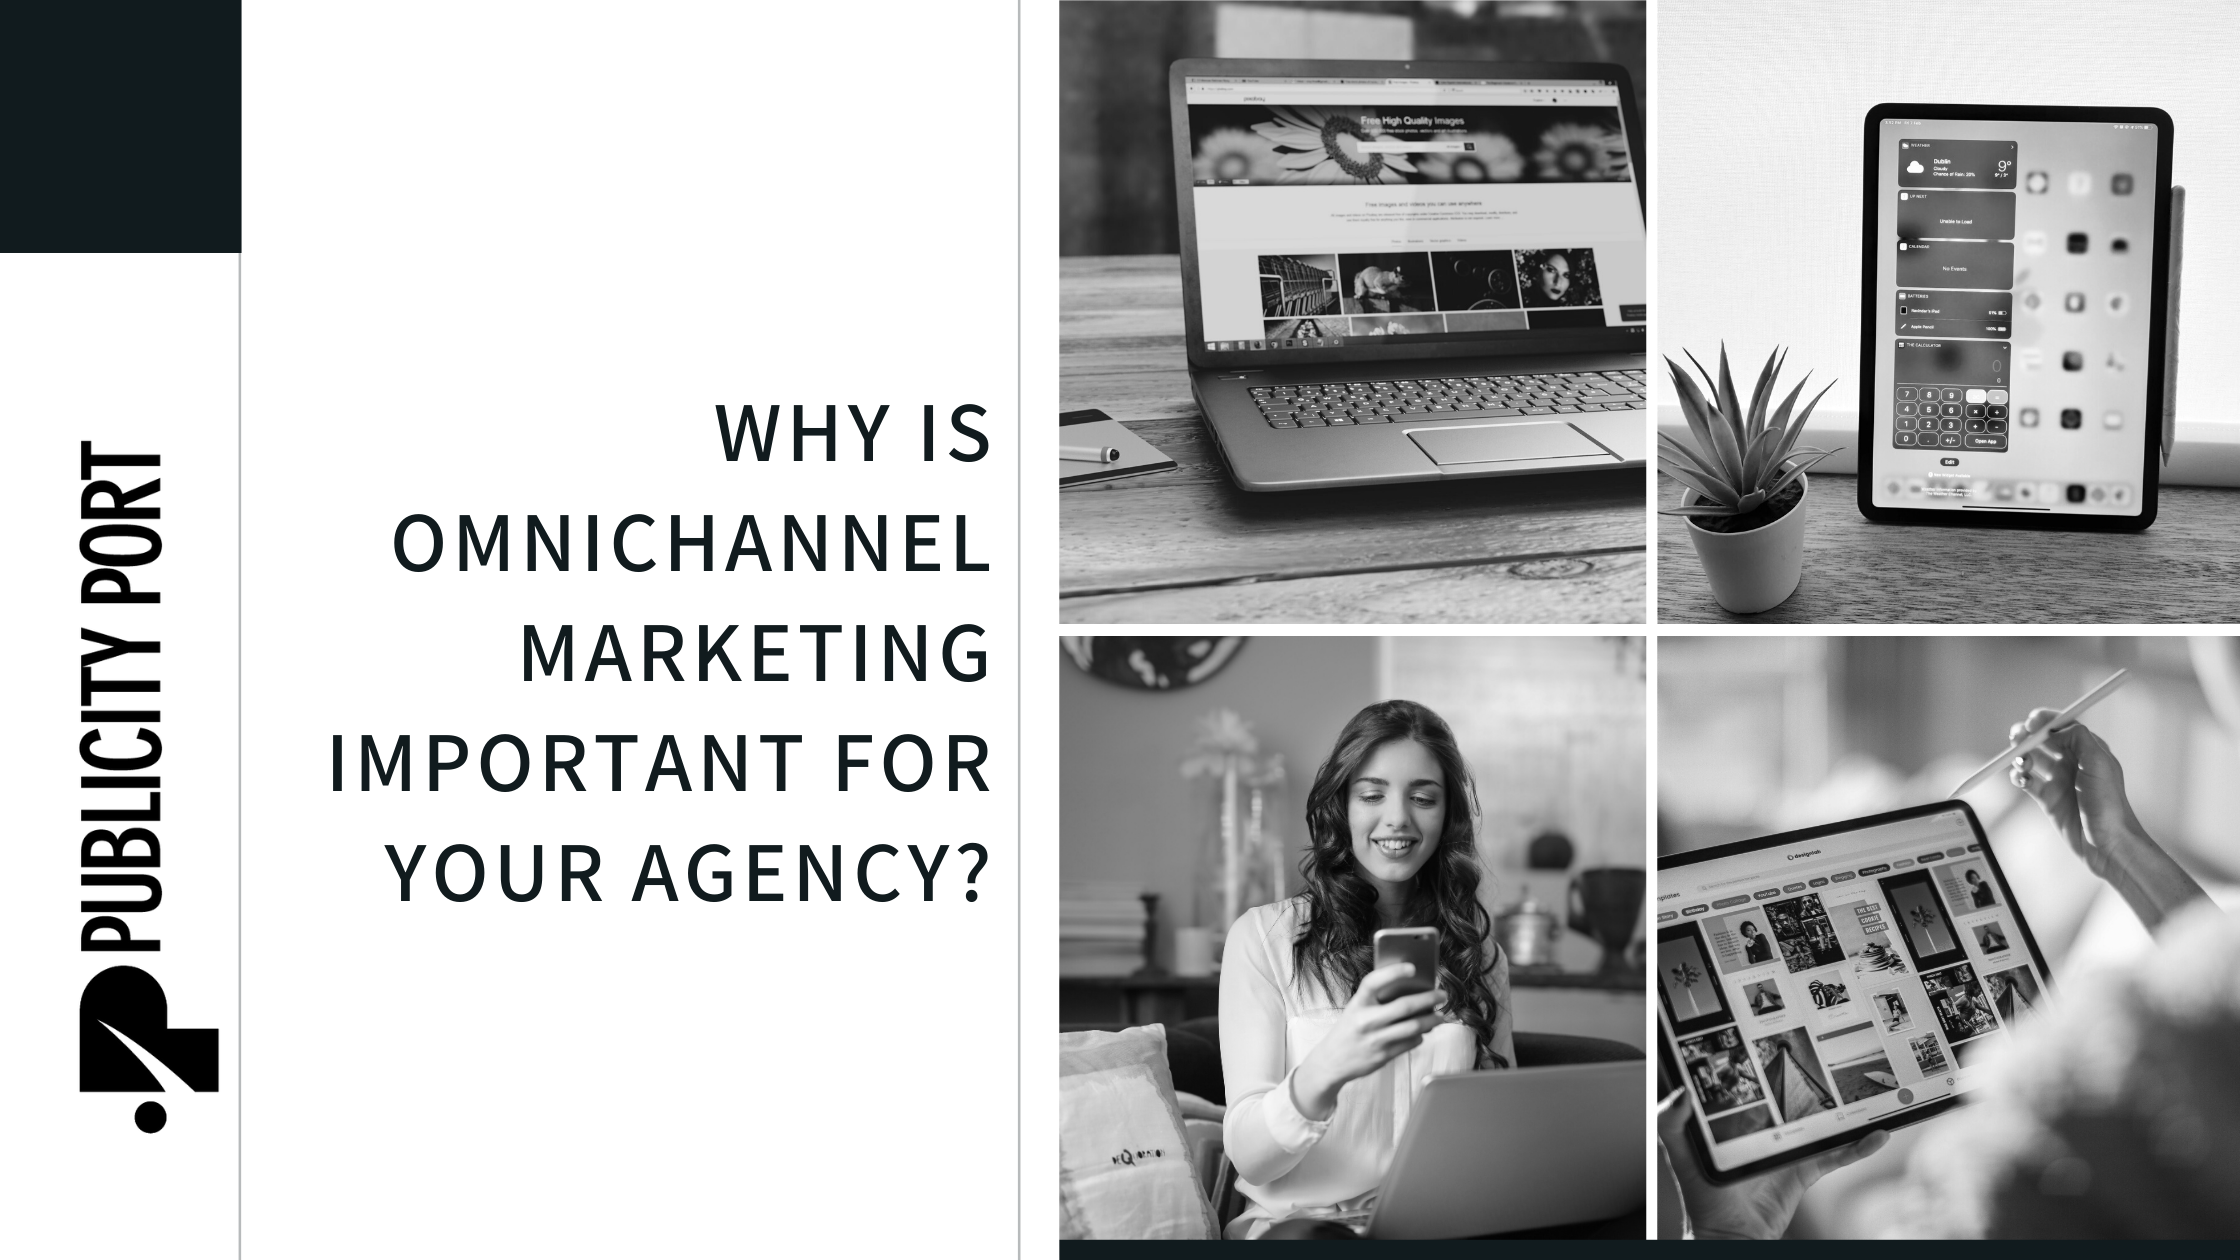 Why is Omnichannel Marketing Important for Your Agency?